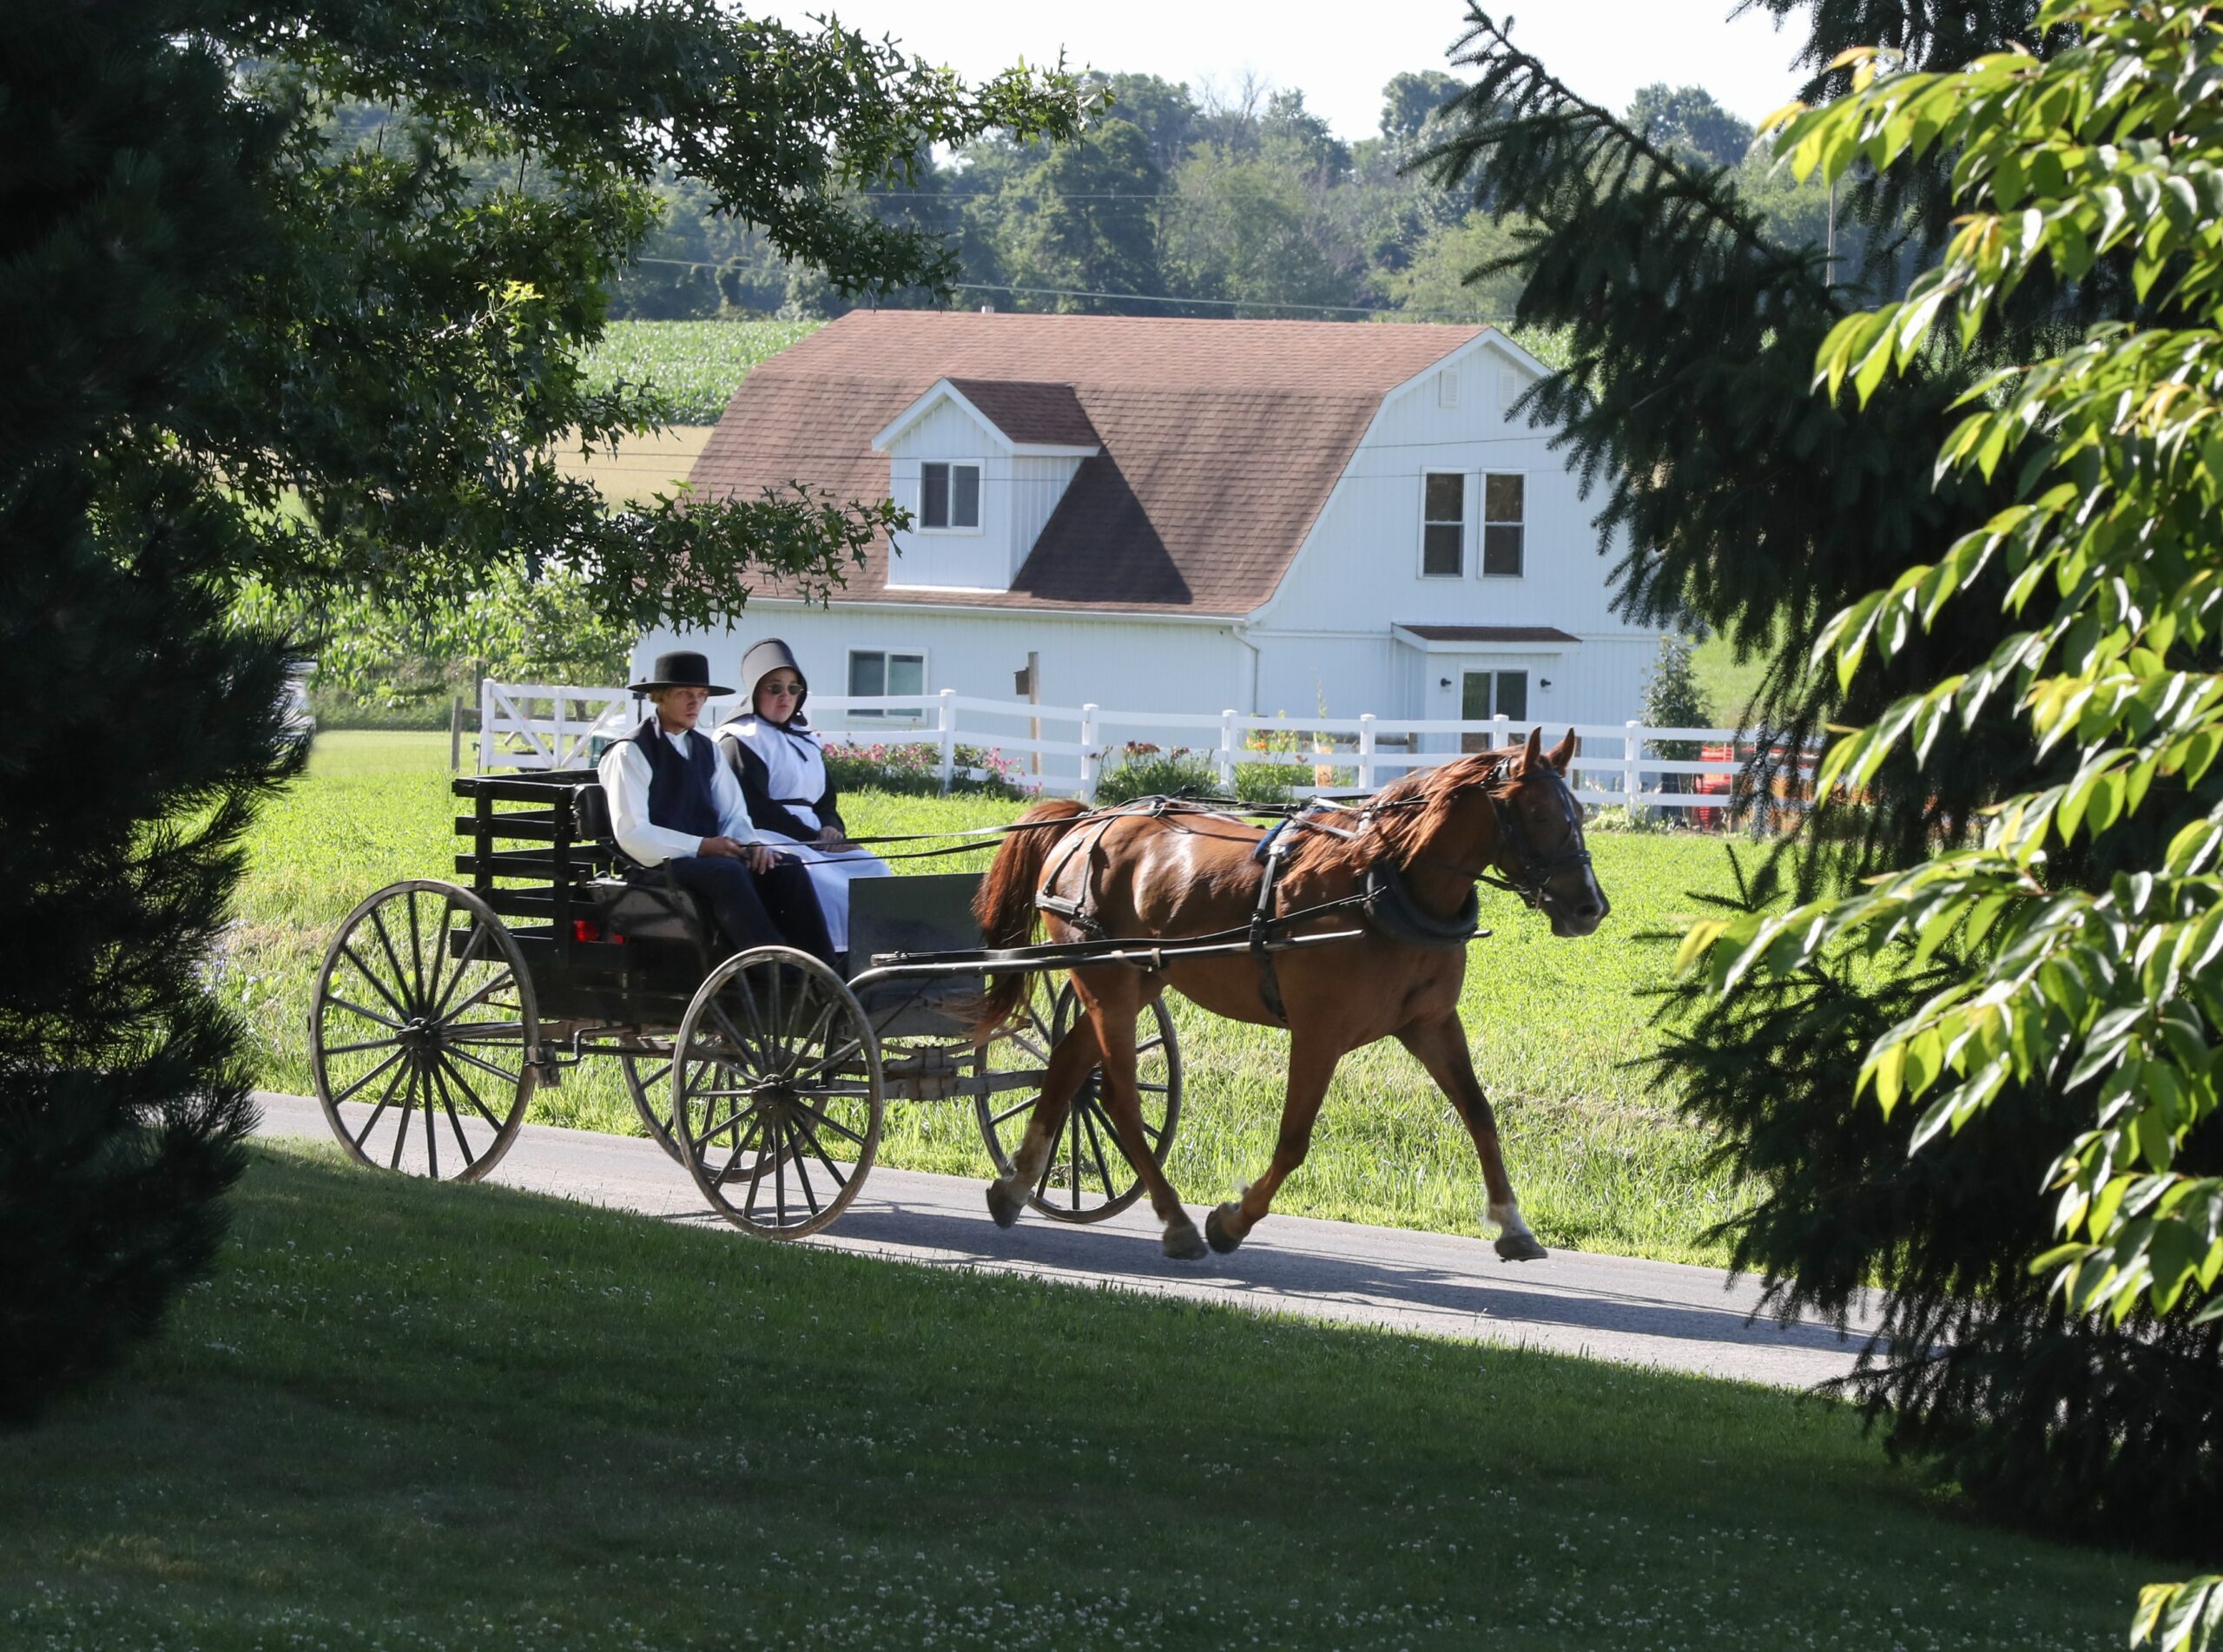 Amish couple riding on a horse-drawn wagon